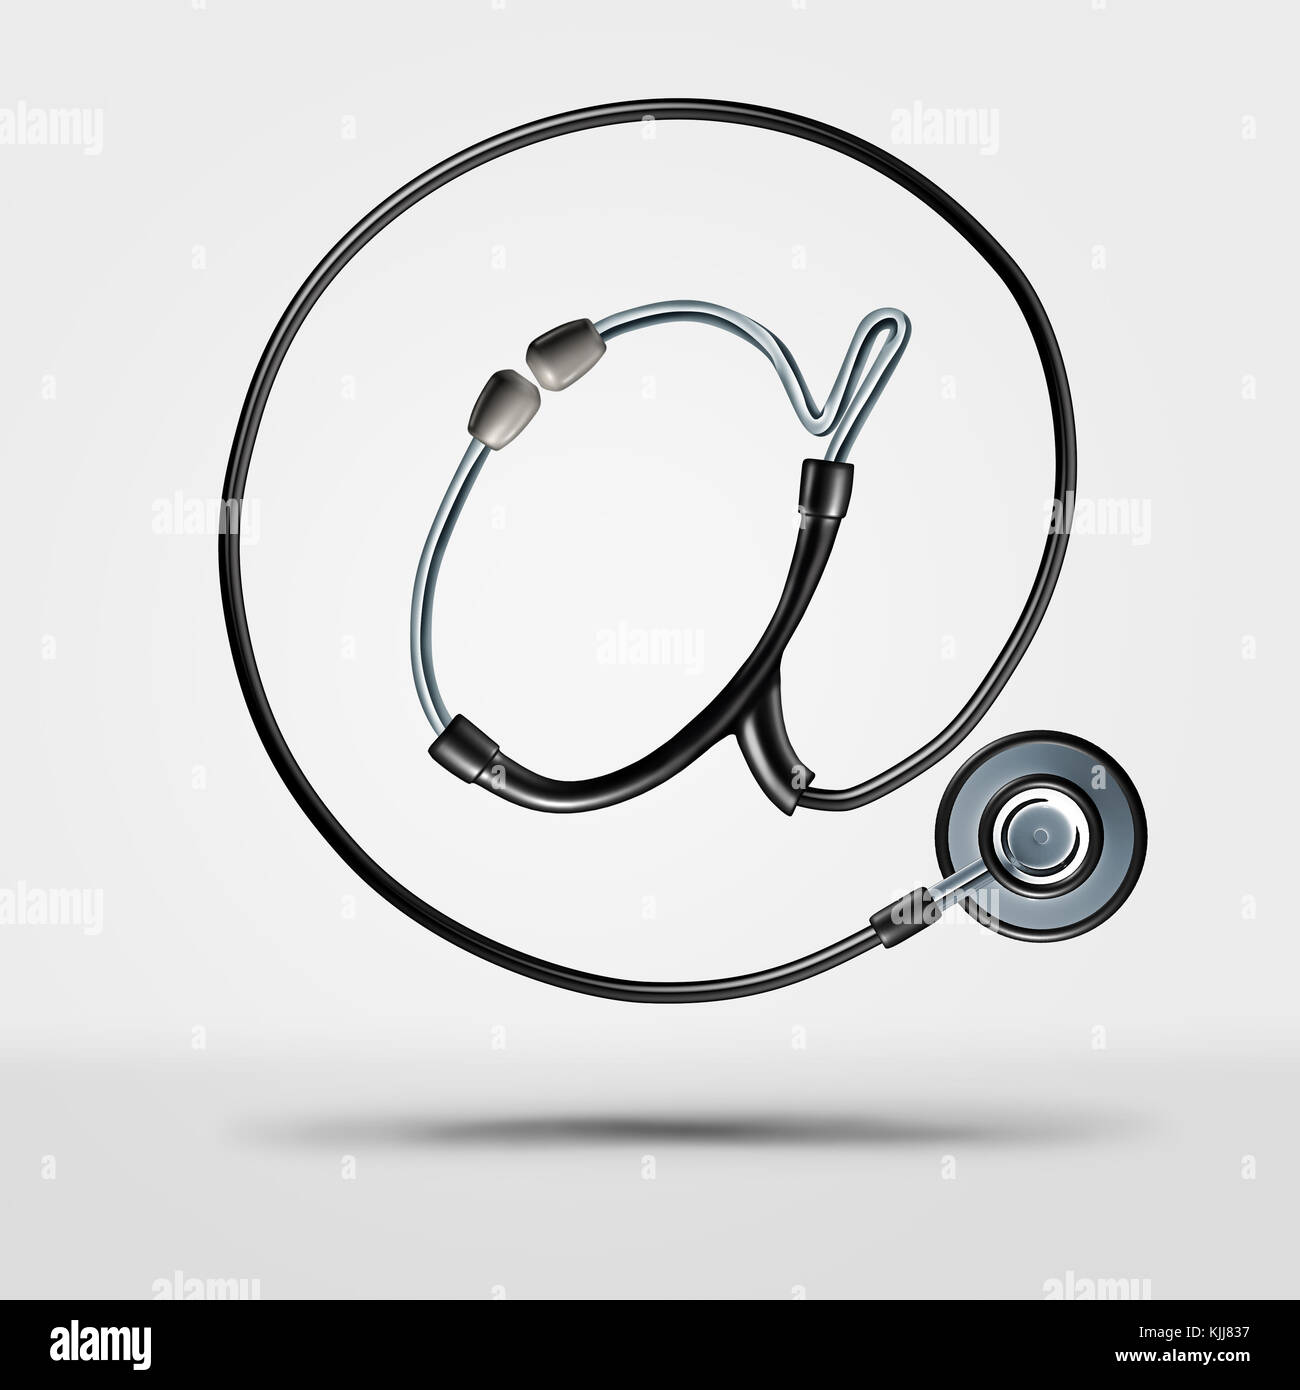 Internet medicine and medical doctor online communication or hospital health care information as a stethoscope shaped as an email symbol. Stock Photo